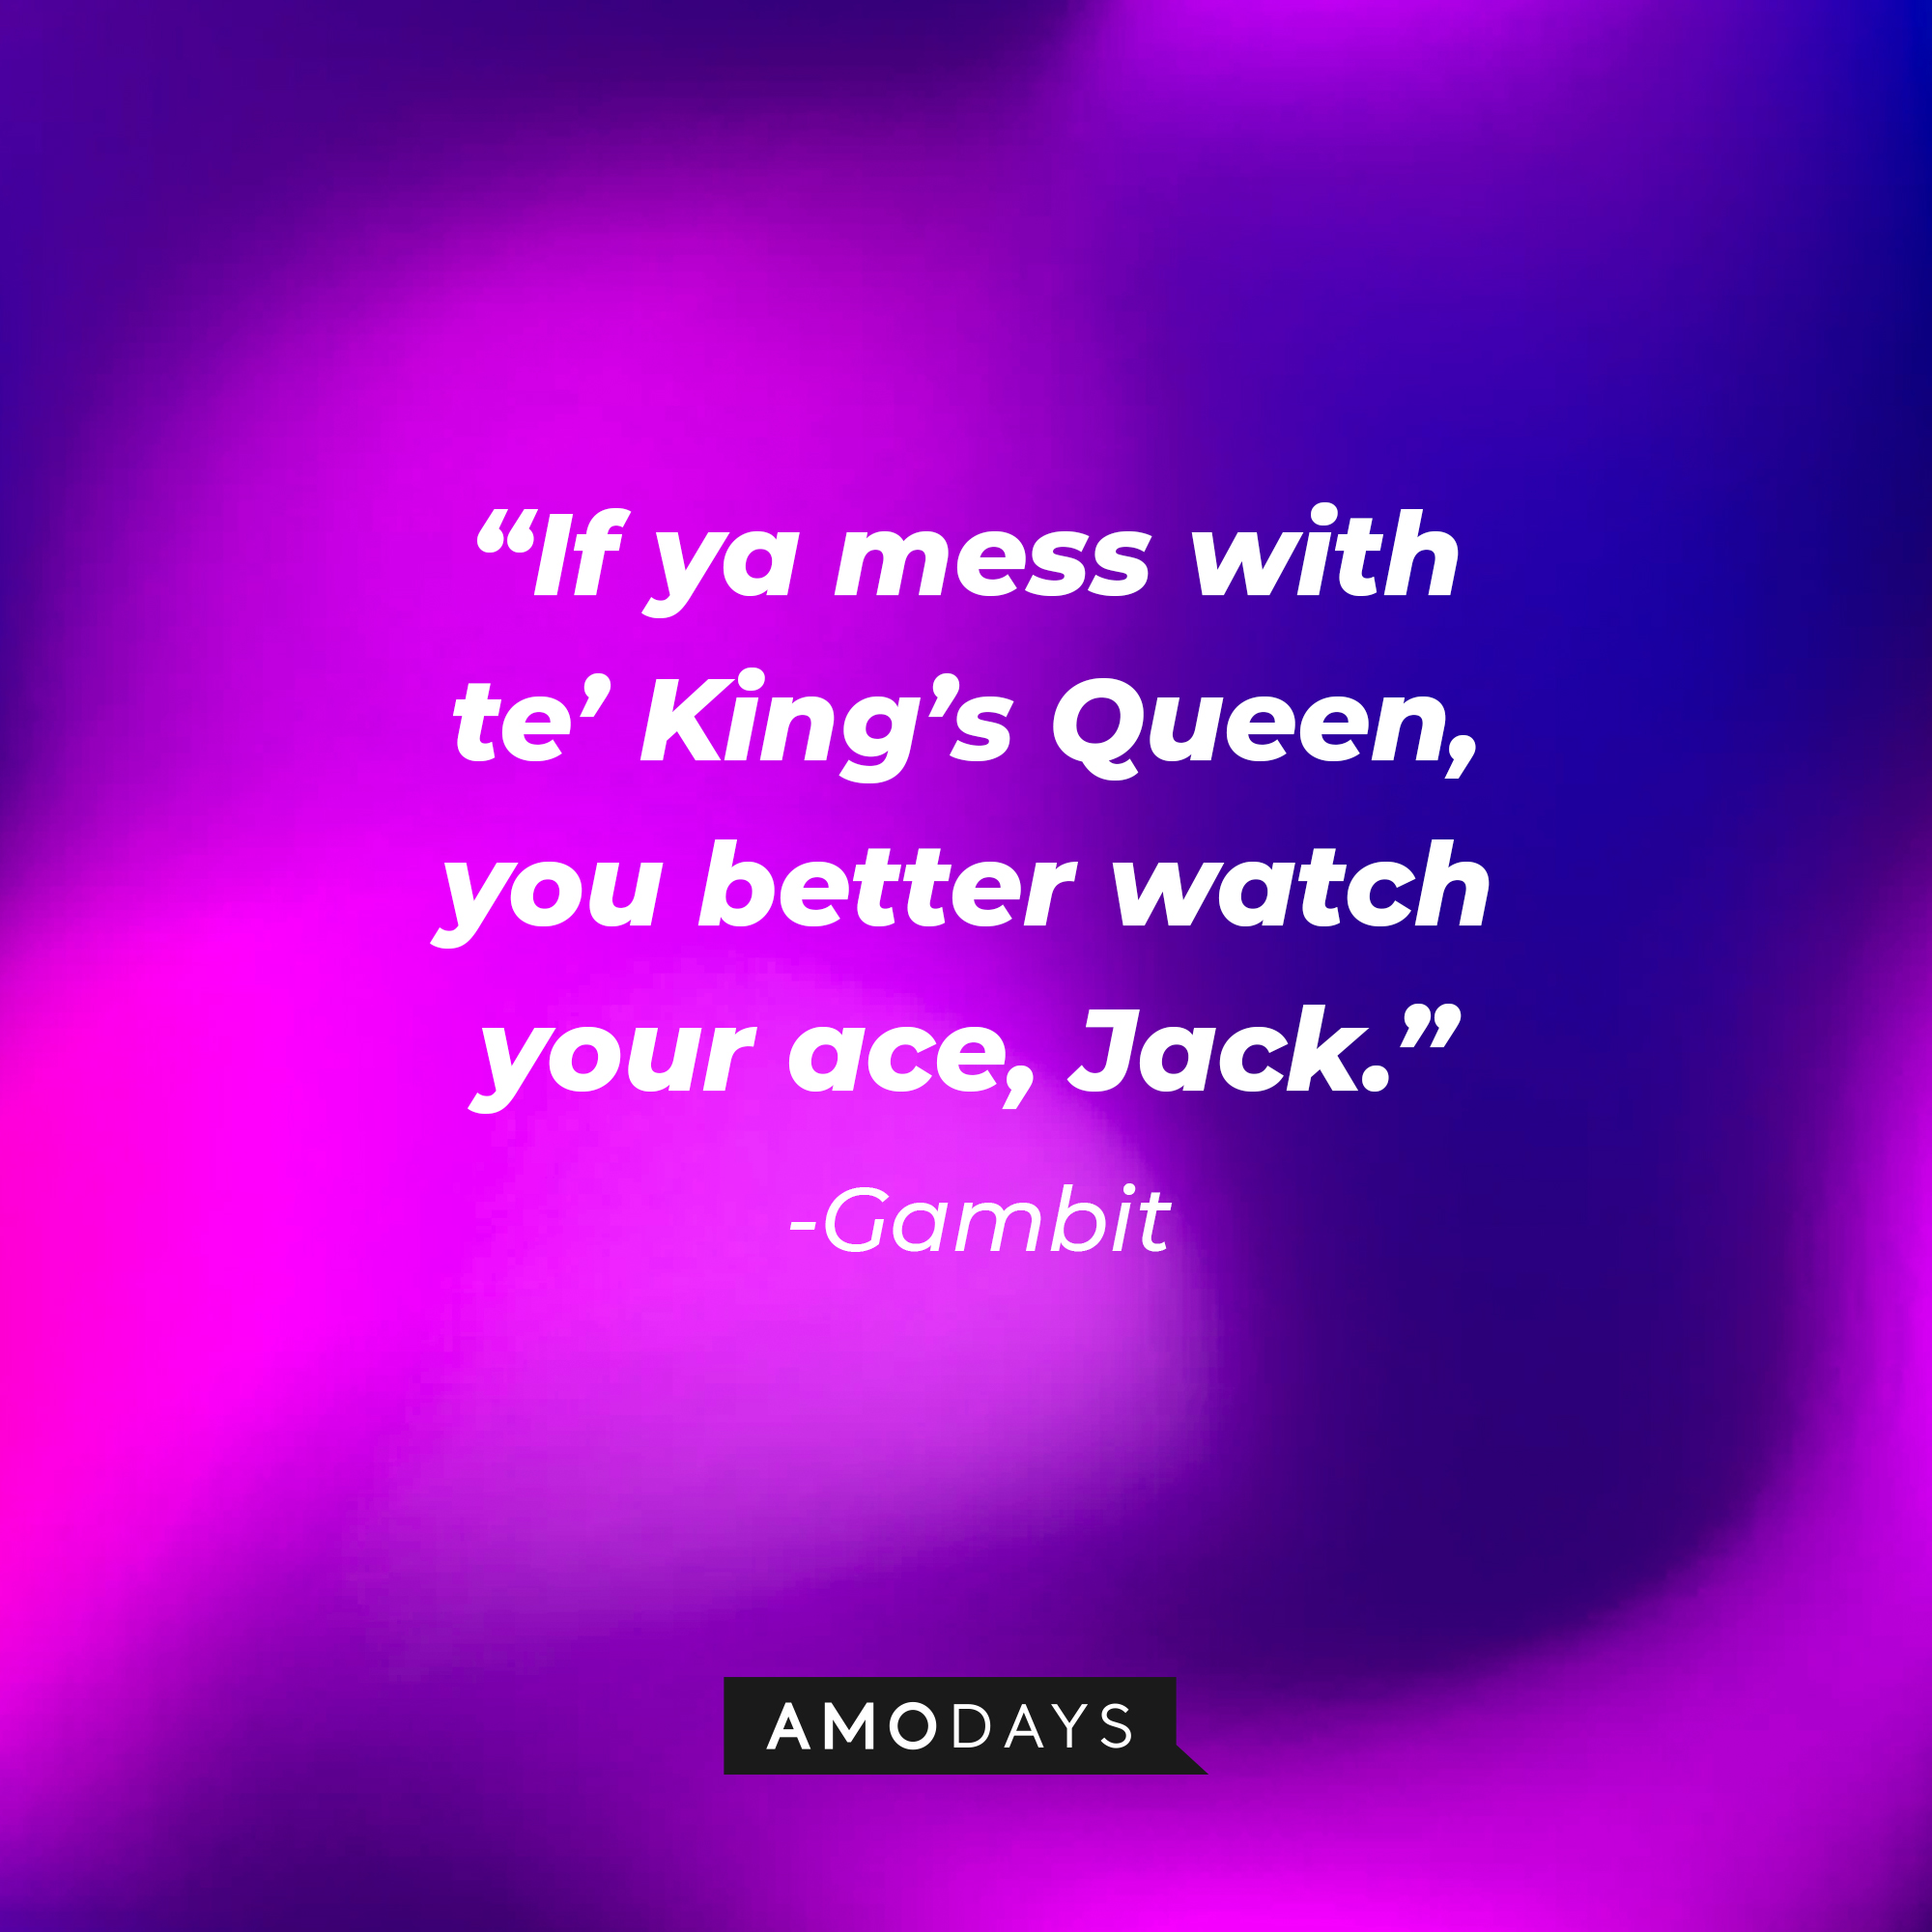 Gambit’s quote: “If ya mess with te’ King’s Queen, you better watch your ace, Jack.”  | Source: AmoDays